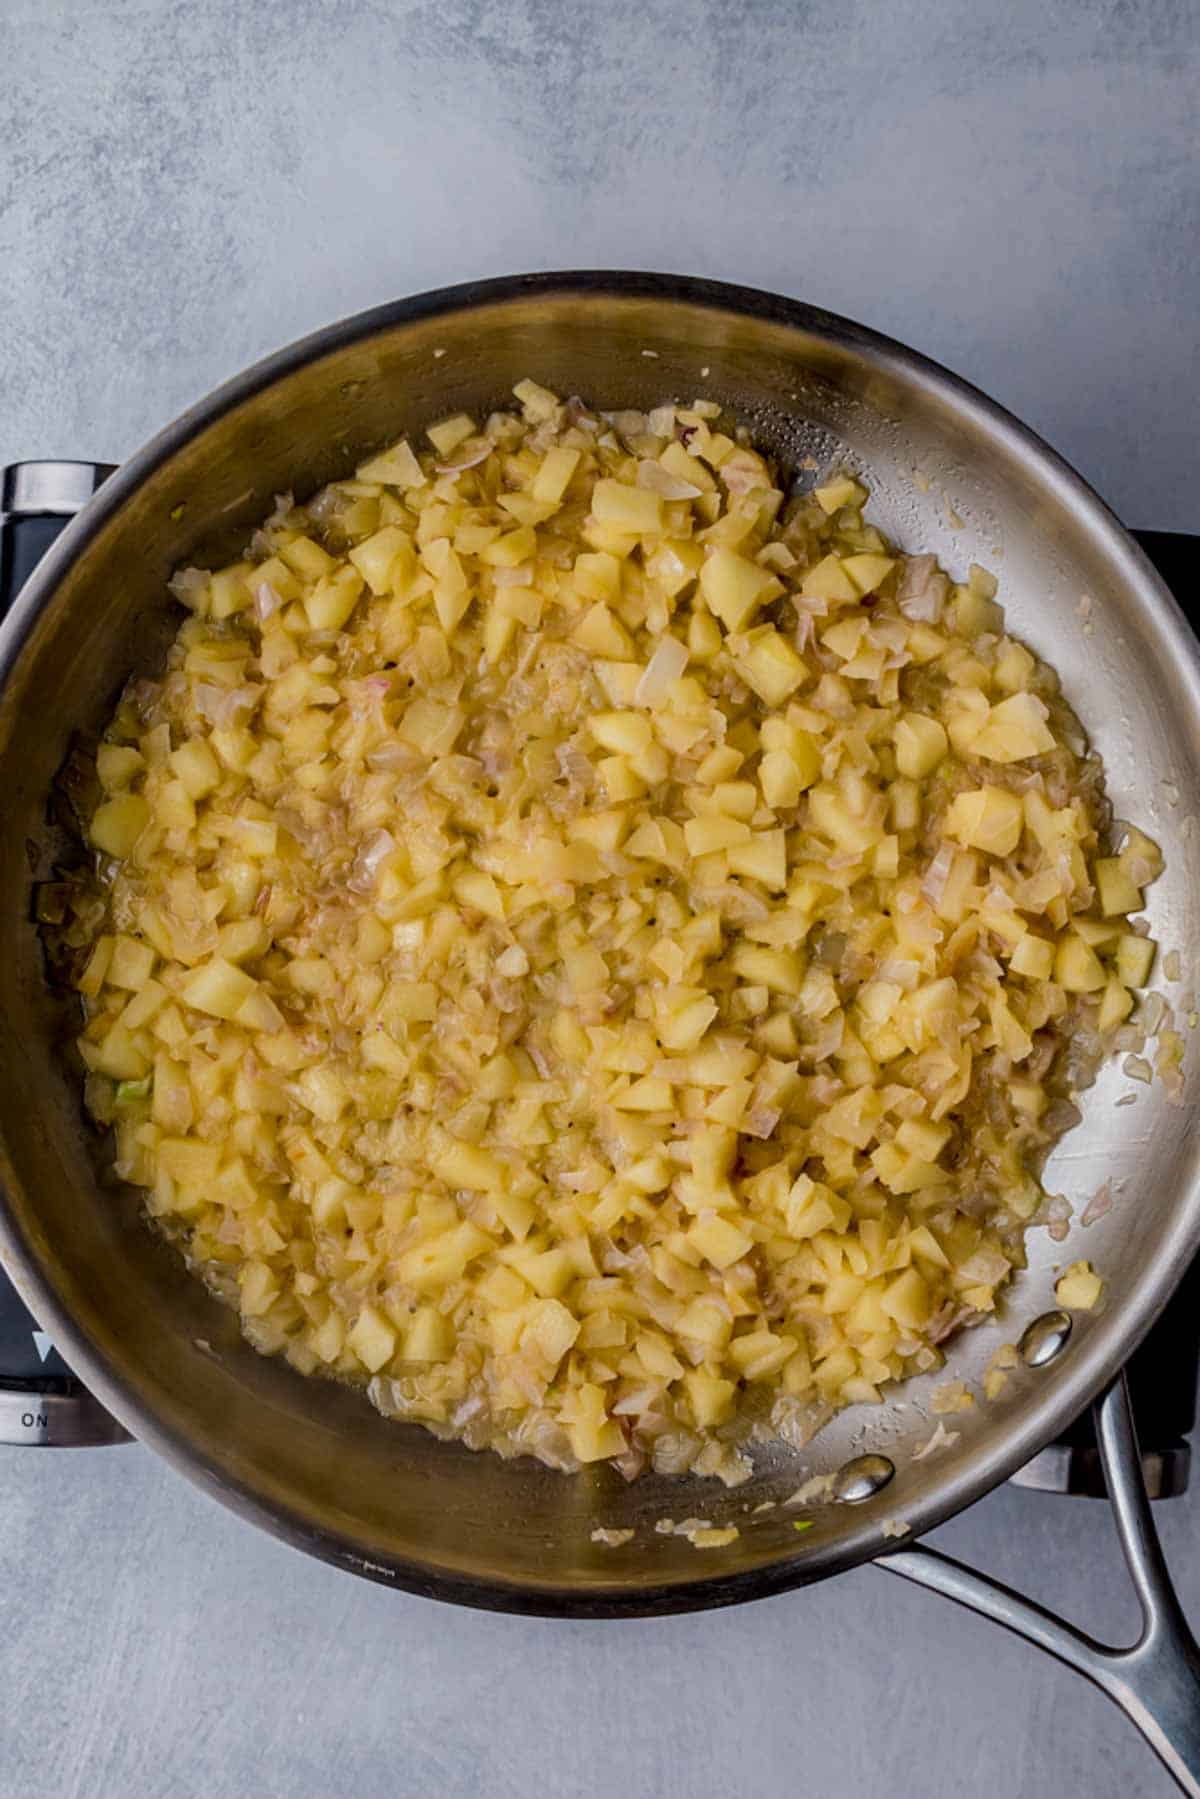 a yellow tinted sauce being cooked in a skillet